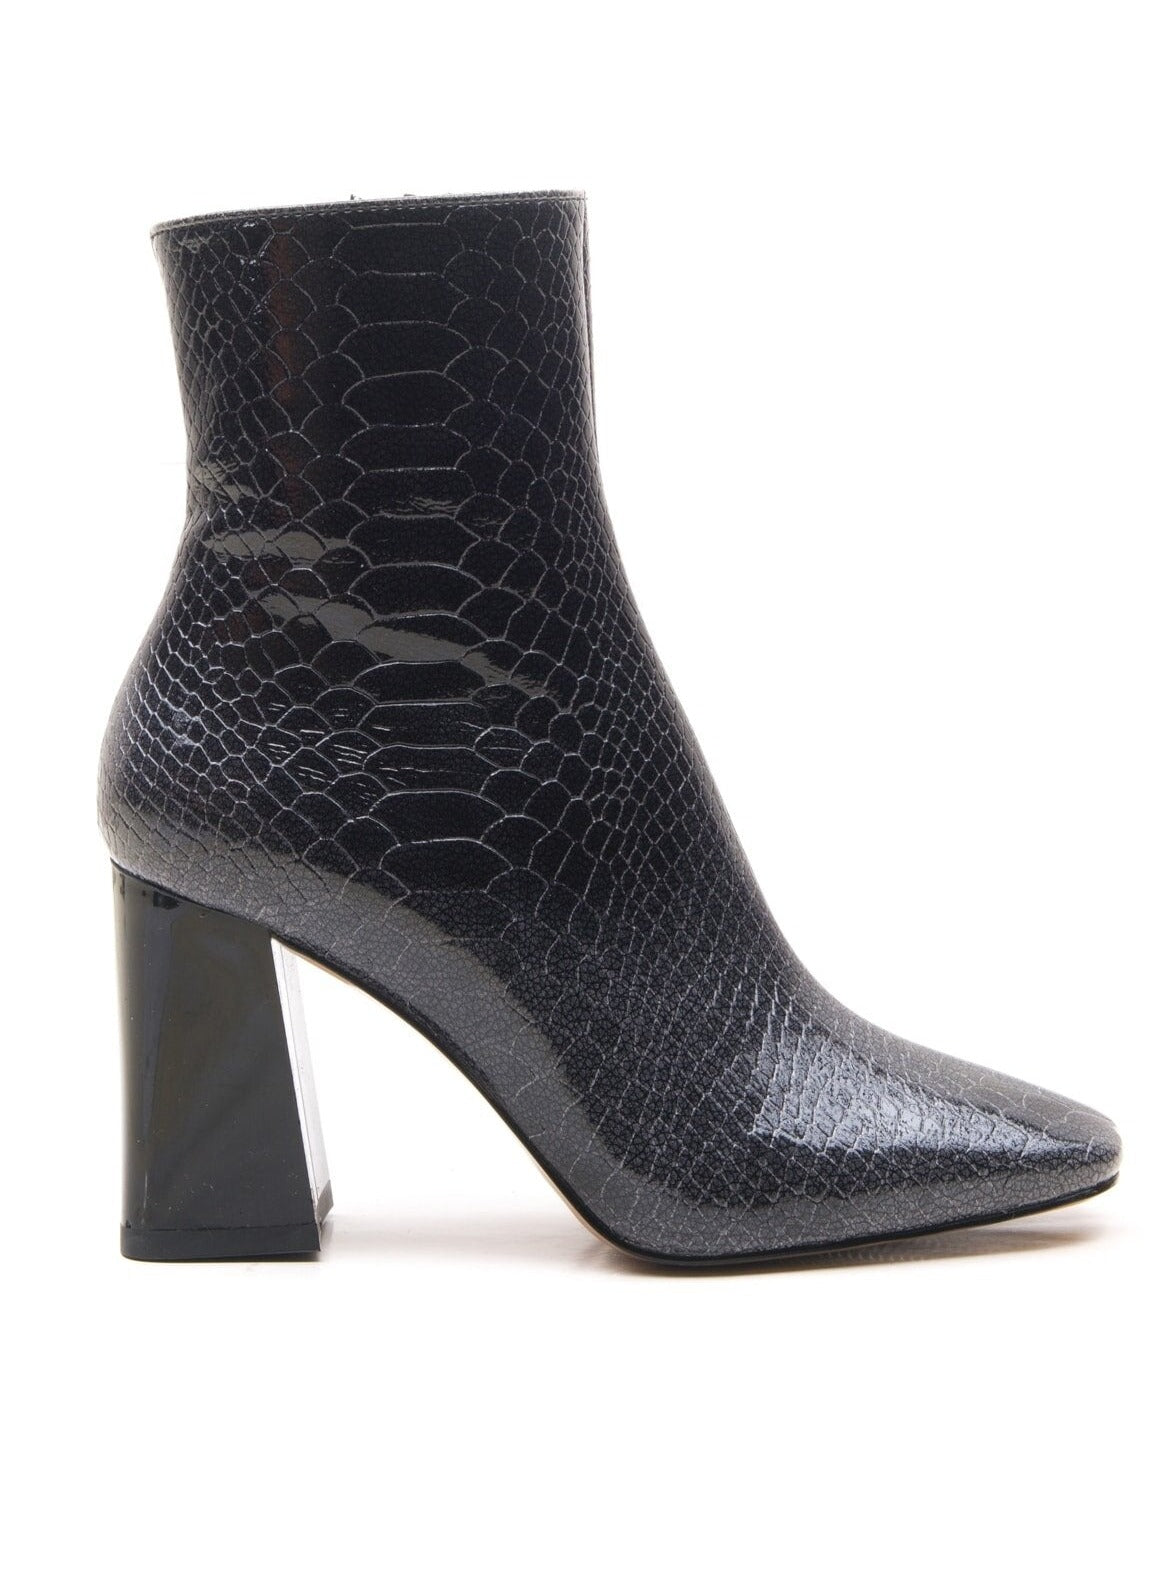 gray snake printed ankle heel boots